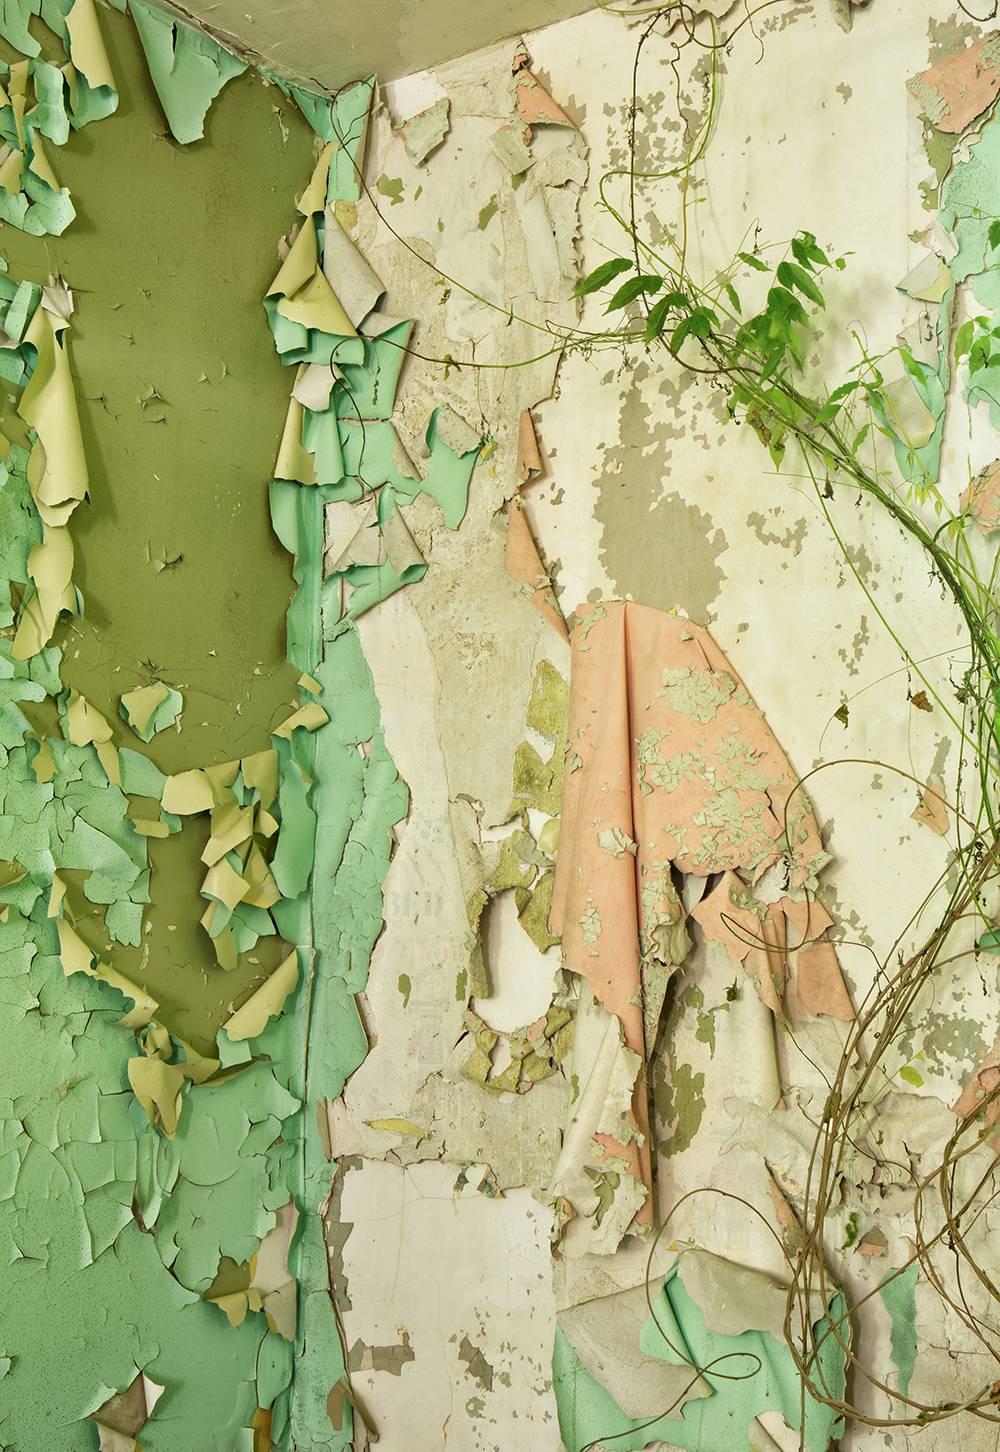 "Rise", color photograph, peeling paint, nature, pink, beige, green, abandoned - Photograph by Rebecca Skinner